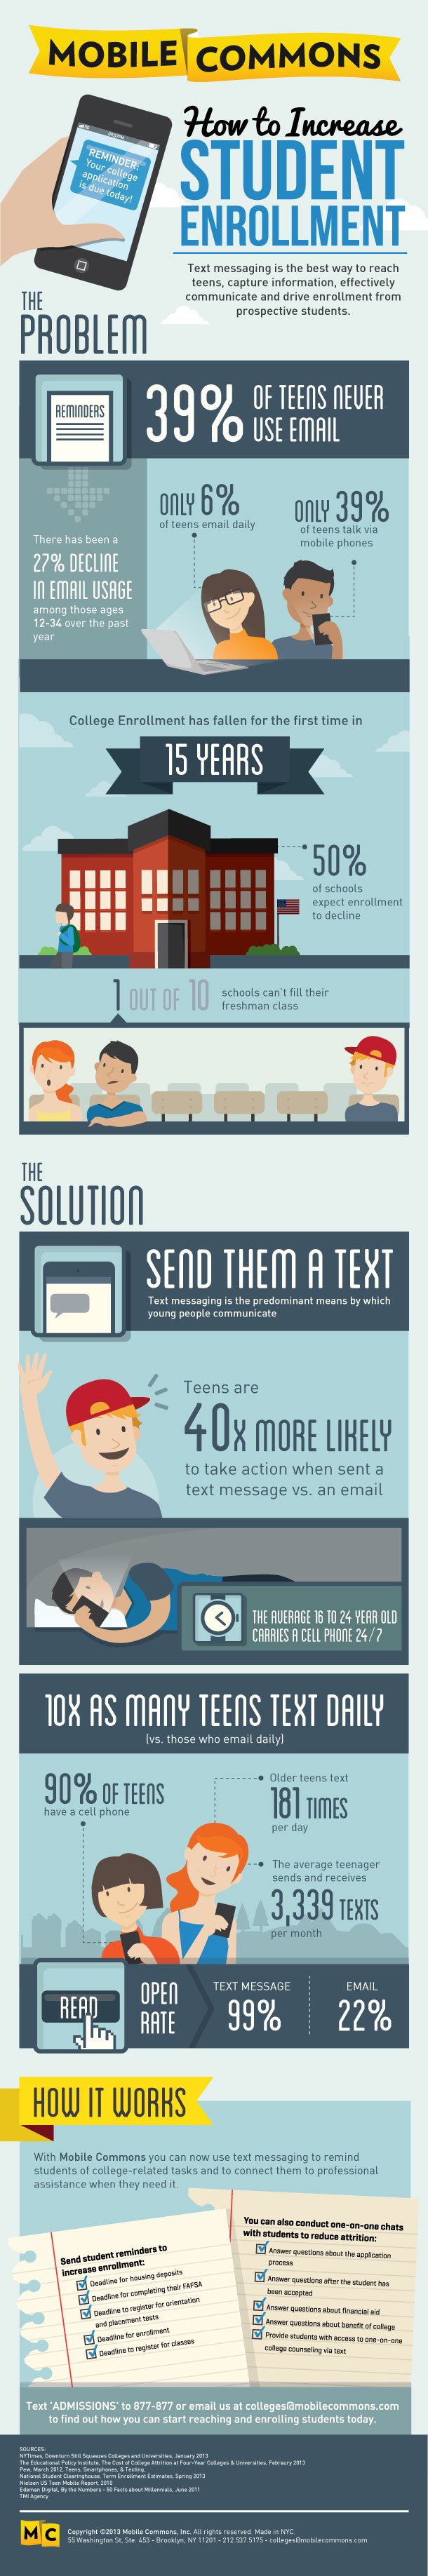 How to Increase Student Enrollment with Mobile Infographic